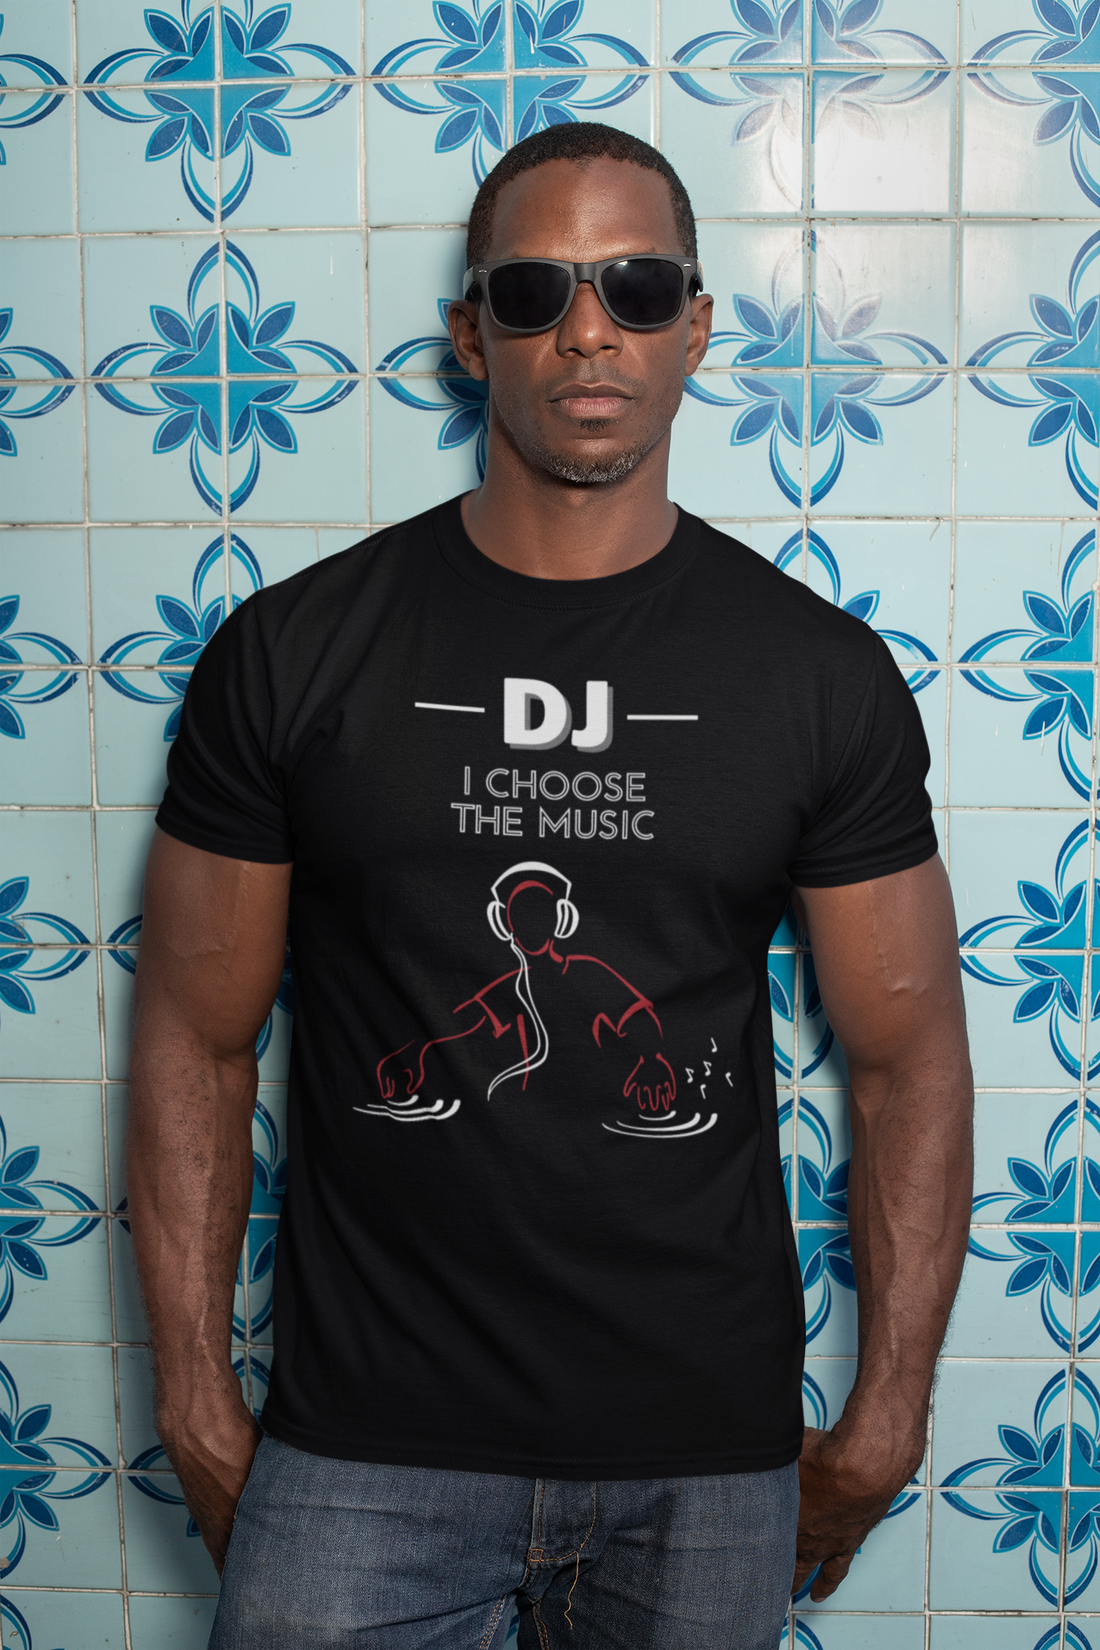 A male wearing a black cool Tshirt design with the text "Dj, I choose the music" with an image of a DJ playing music